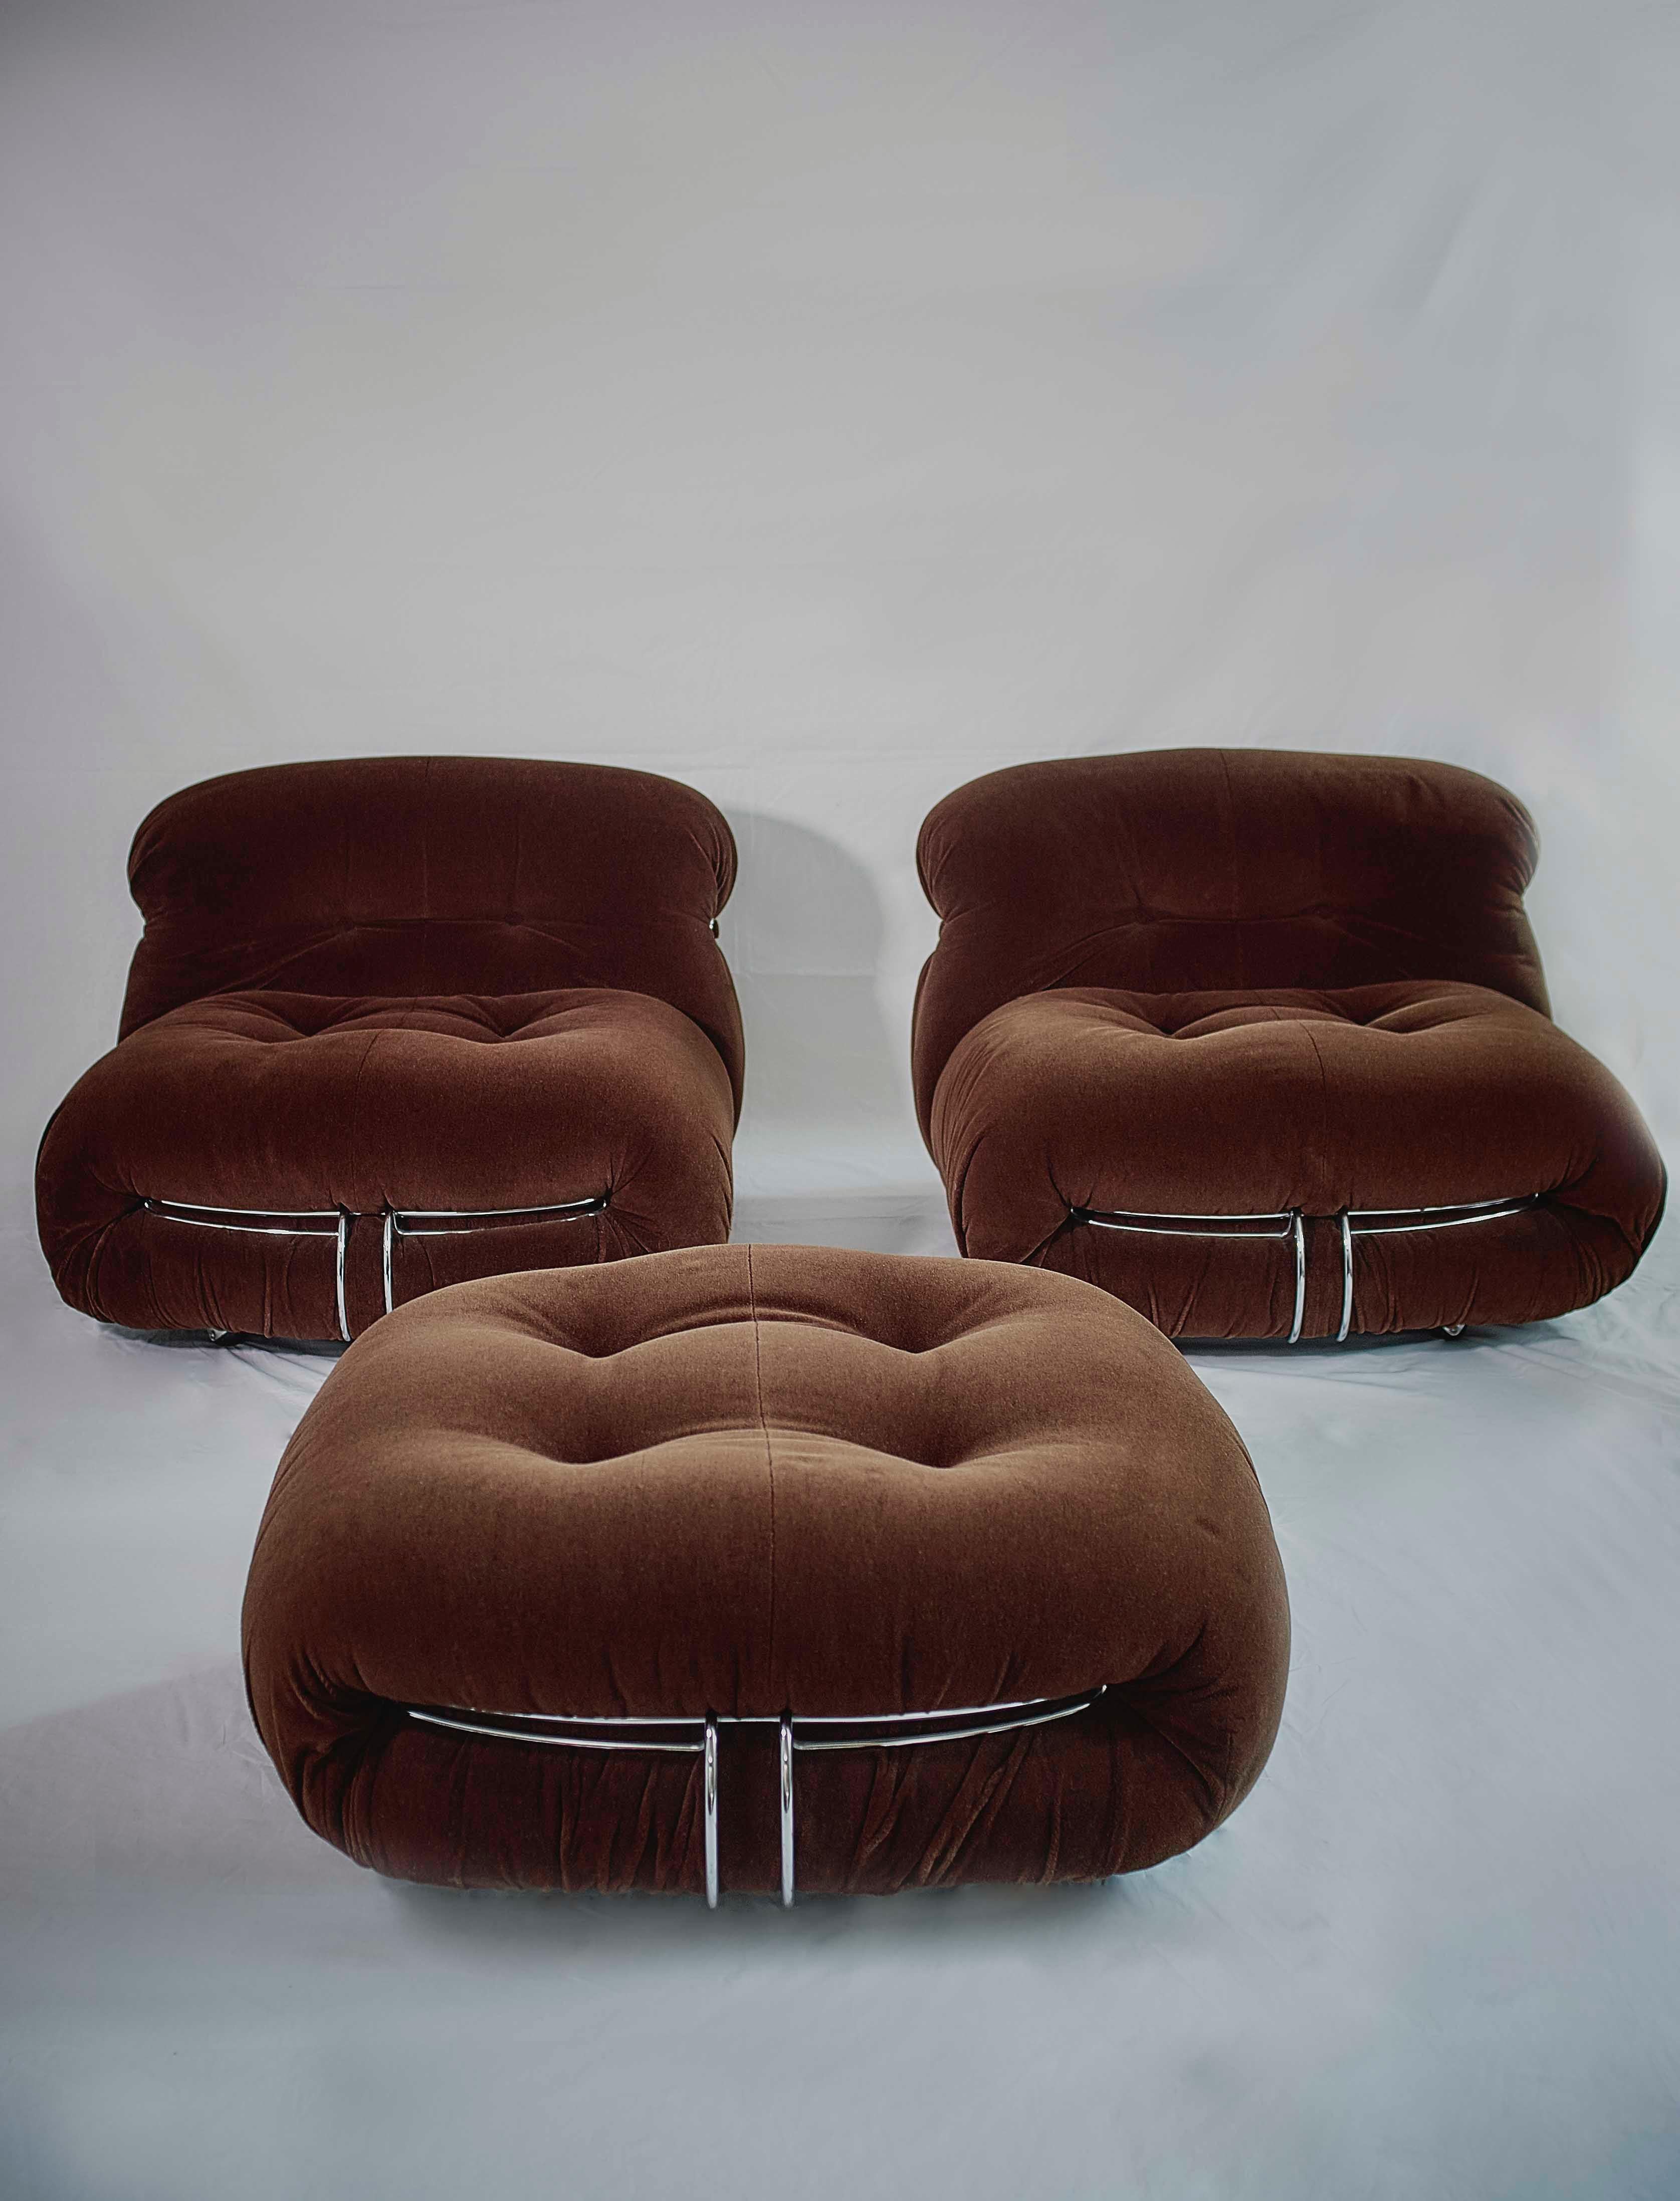 Soriana pair of lounge chairs and ottoman, in fabric and metal, design by Afra & Tobia Scarpa for Cassina 1970s.
One of this easy lounge chairs could be transformed into an even more comfortable chaise longue, just by placing the ottoman in front